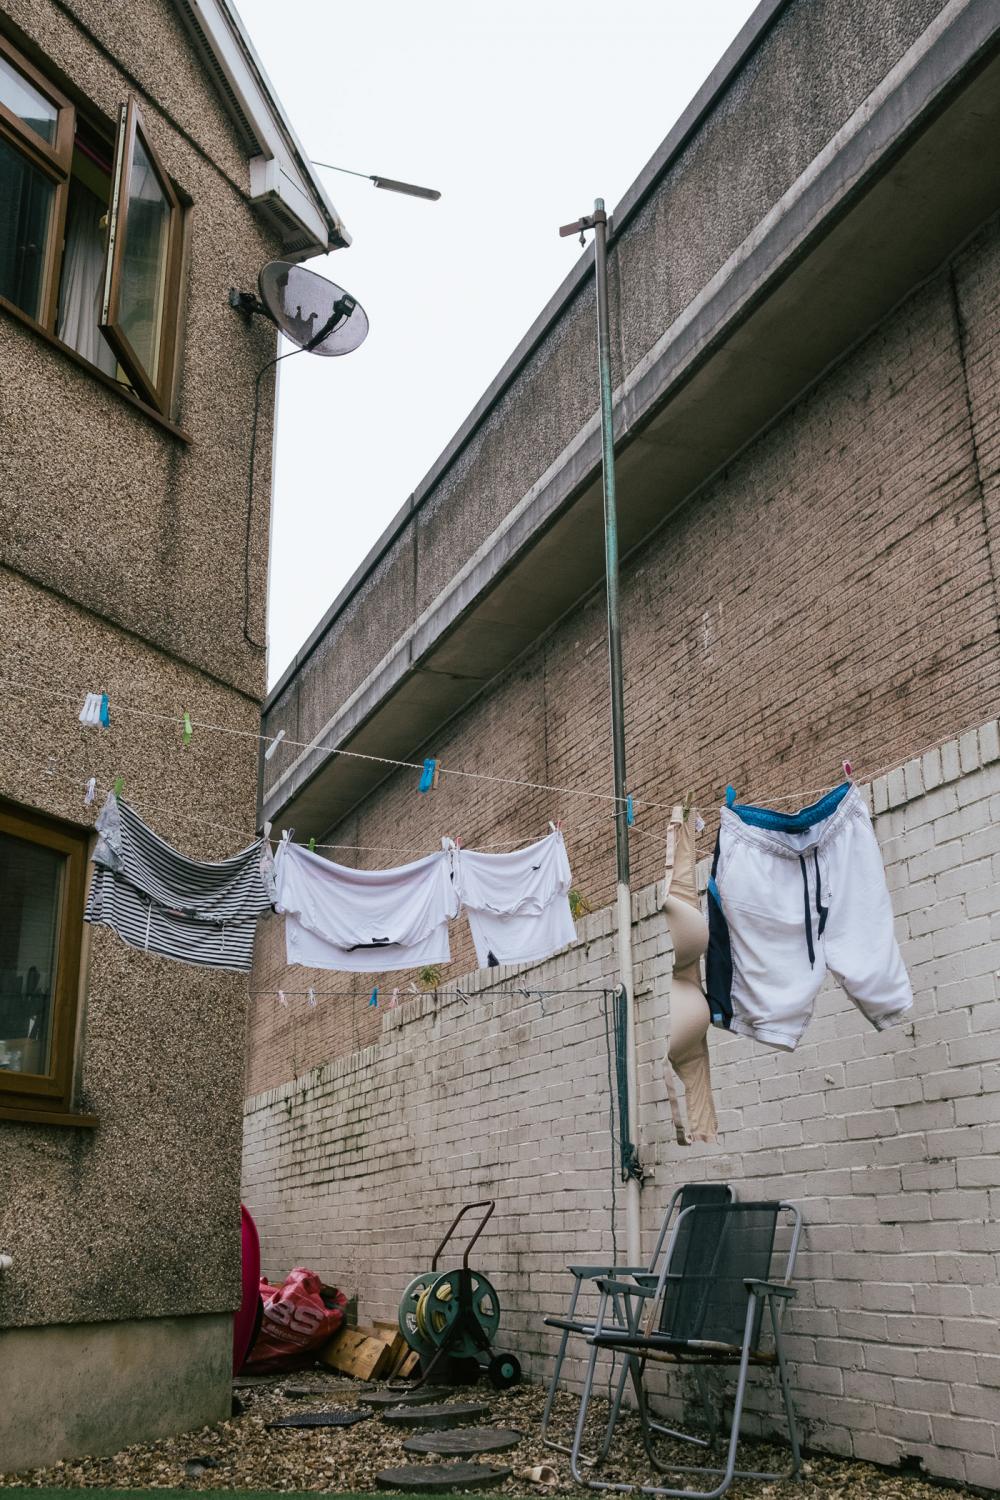 A clothes line attached to the reinforcement wall of the M4 motorway, in the back yard of a house in Port Talbot, Wales.